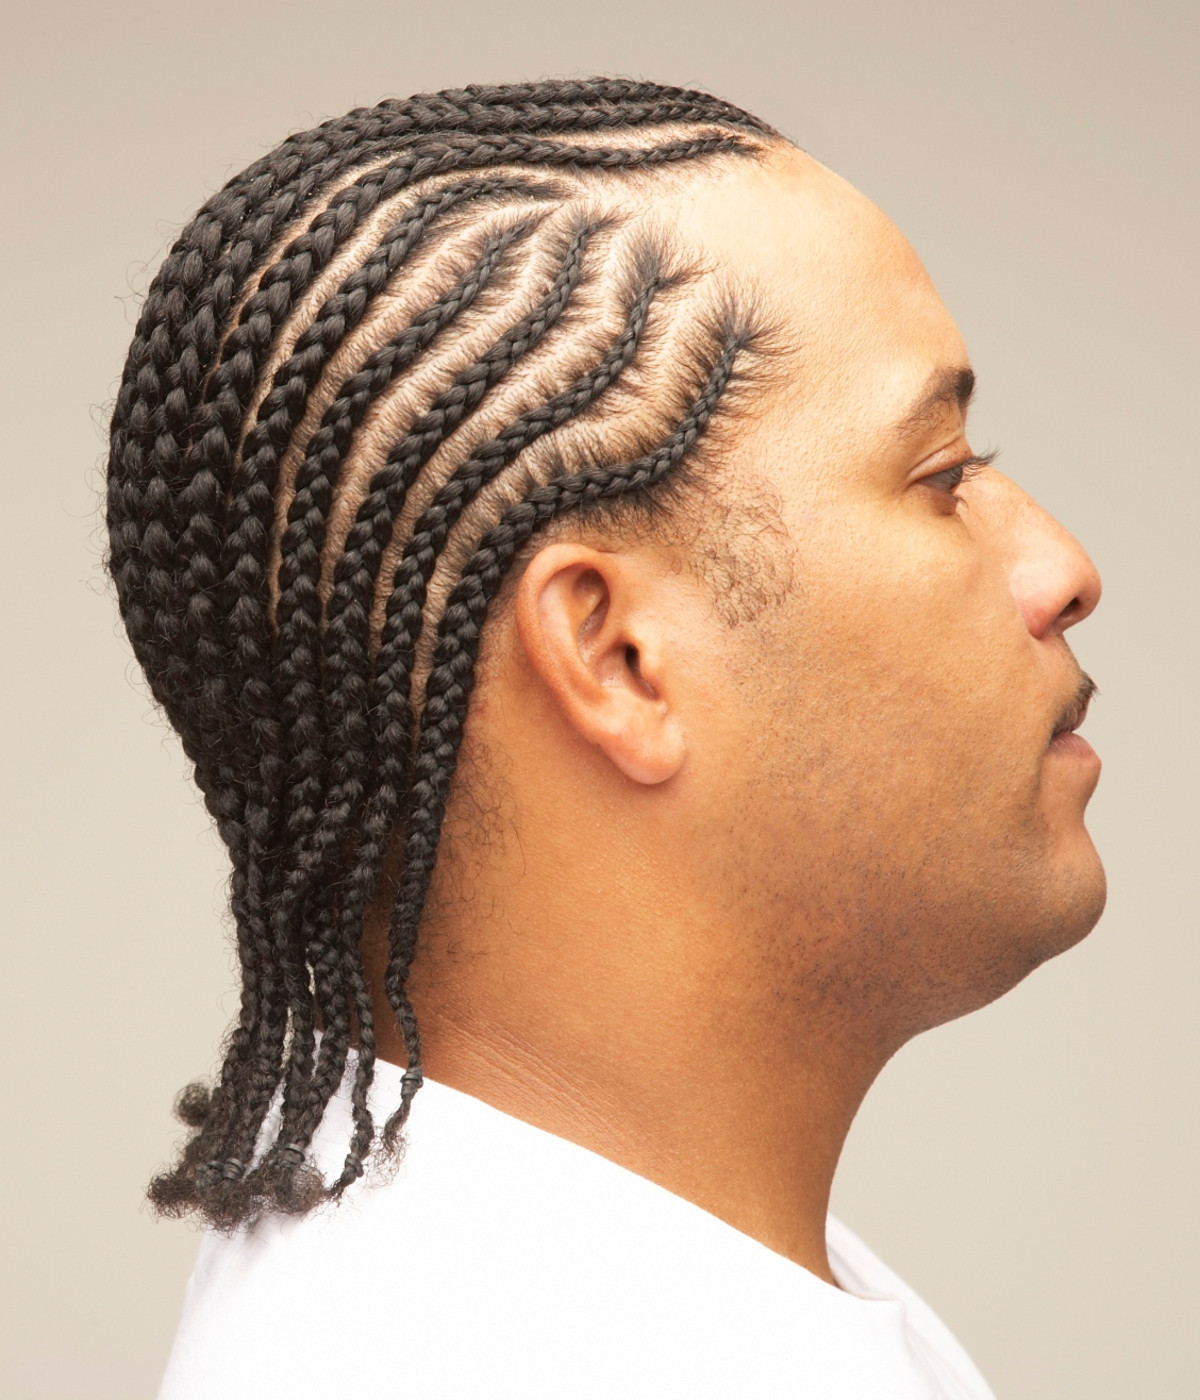 Men Braiding Hairstyle
 Braided Hairstyles for Men That Will Catch Everyone s Eye